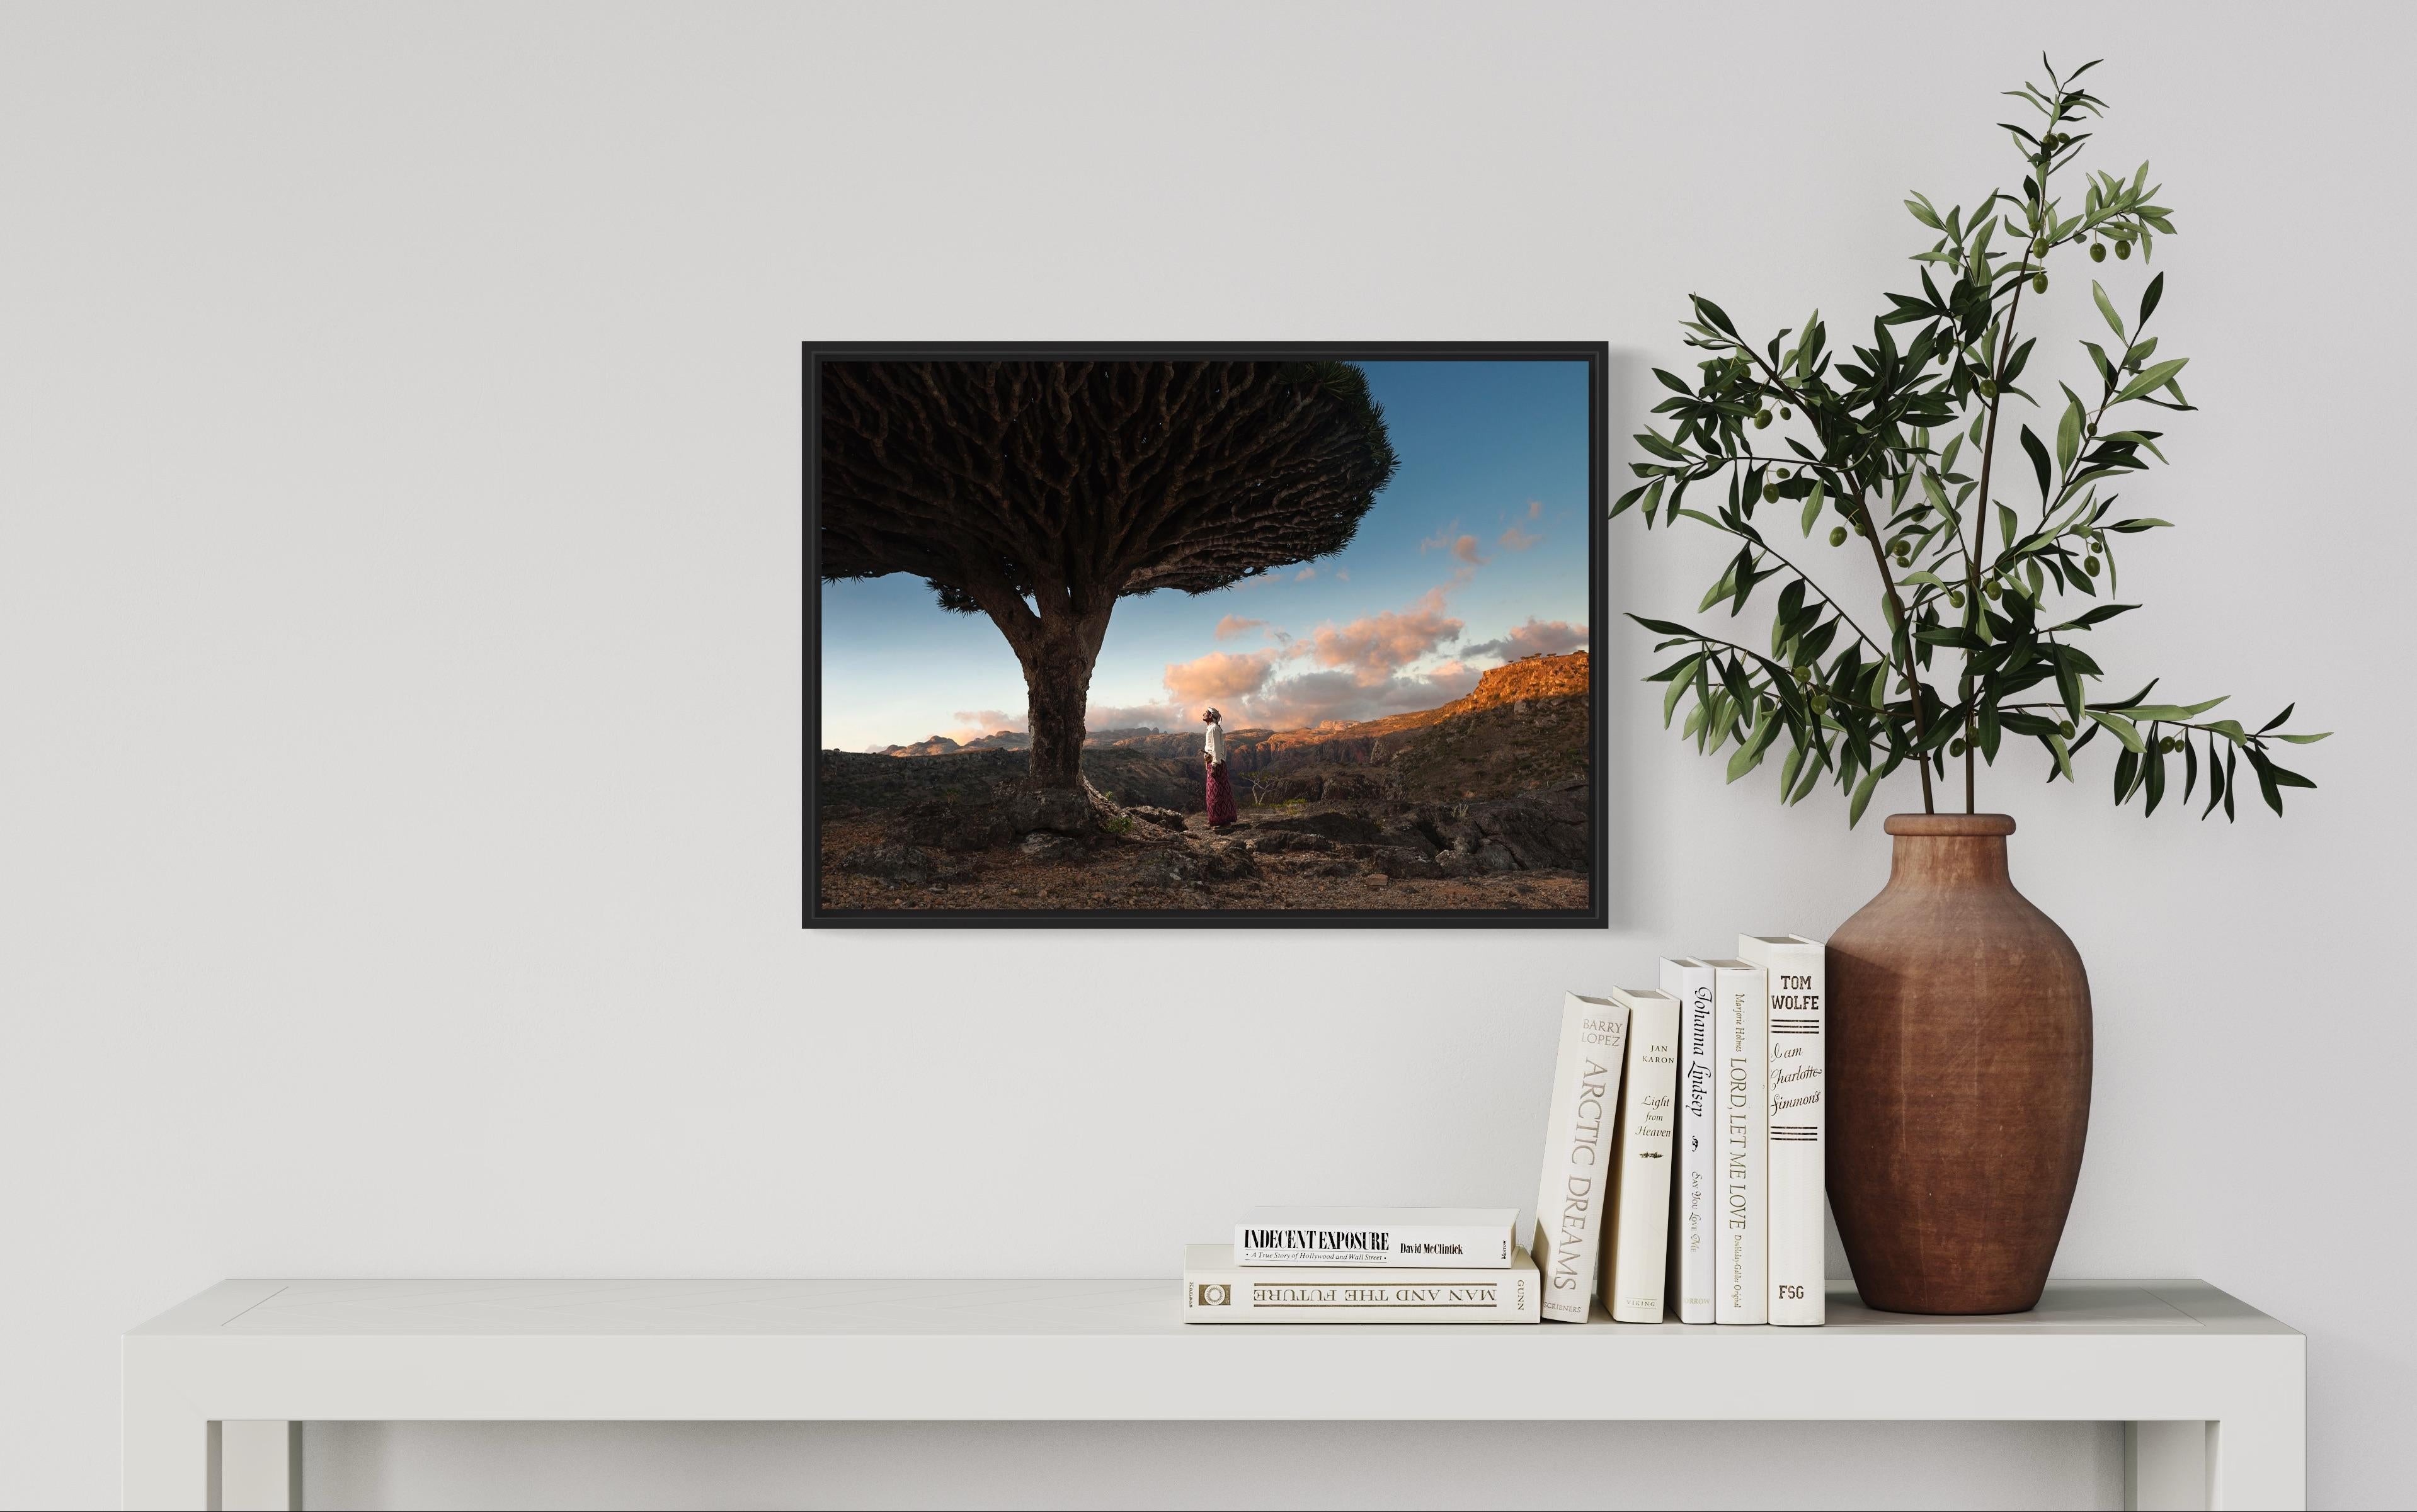 Paining like image of Dragon Blood Tree in Socotra - Yemen - 2020 by Guillaume Petermann

Life Framer Photography Prize Winner, Category: The Face Of The Earth

On the Dixam plateau, the dragon blood tree forms a shaded vault. This kind of tree is a